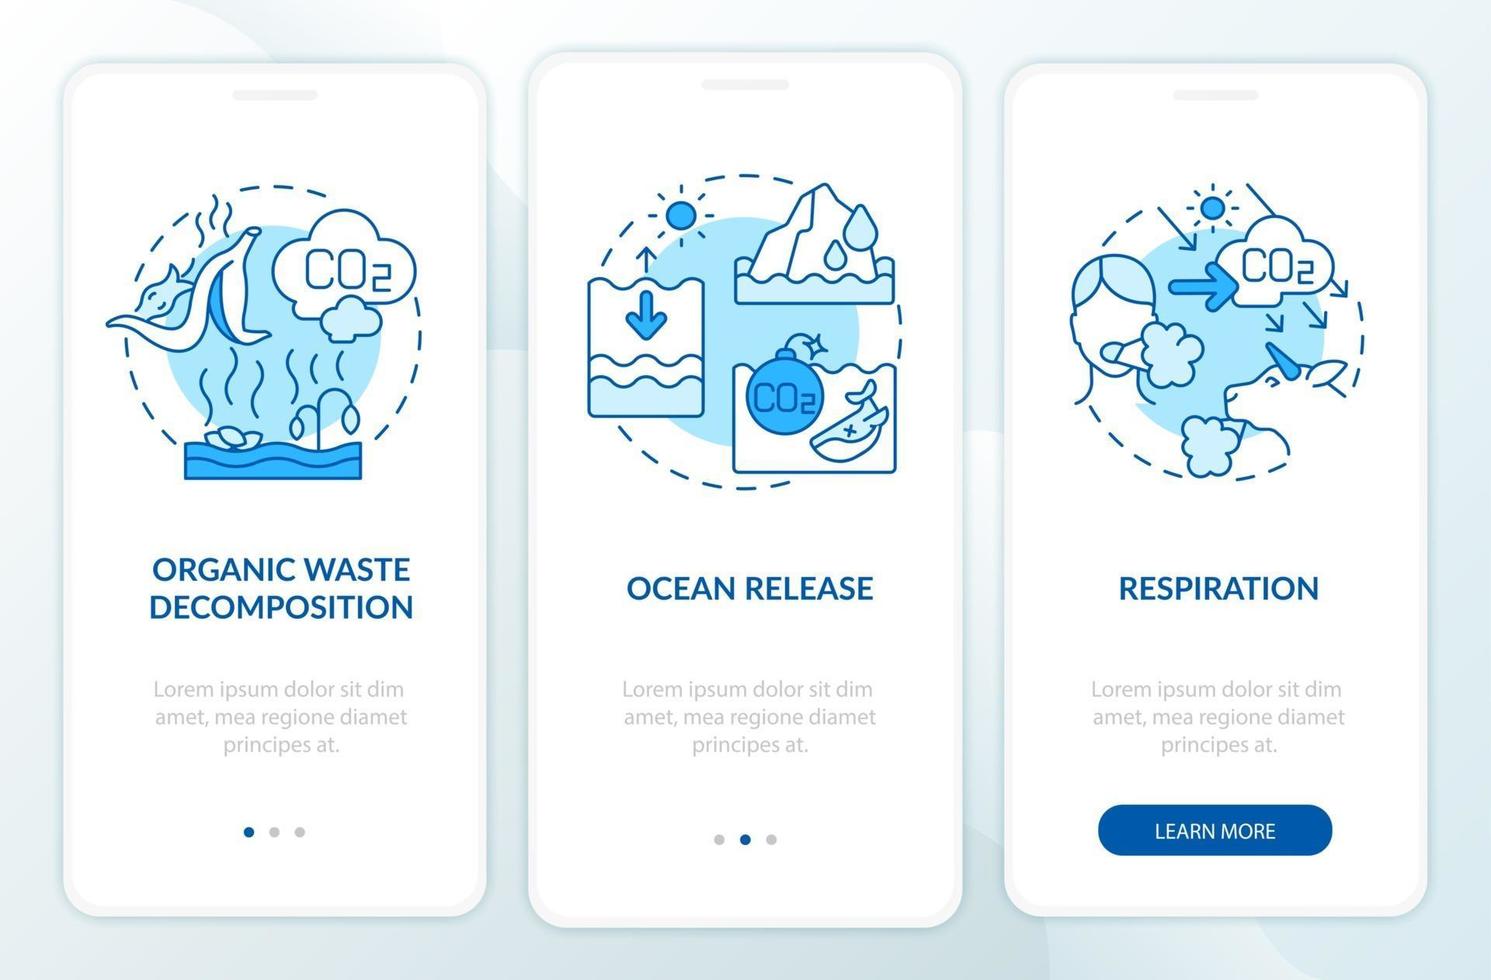 Natural CO2 emissions onboarding mobile app page screen with concepts. Organic waste decomposition walkthrough 3 steps graphic instructions. UI, UX, GUI vector template with linear color illustrations